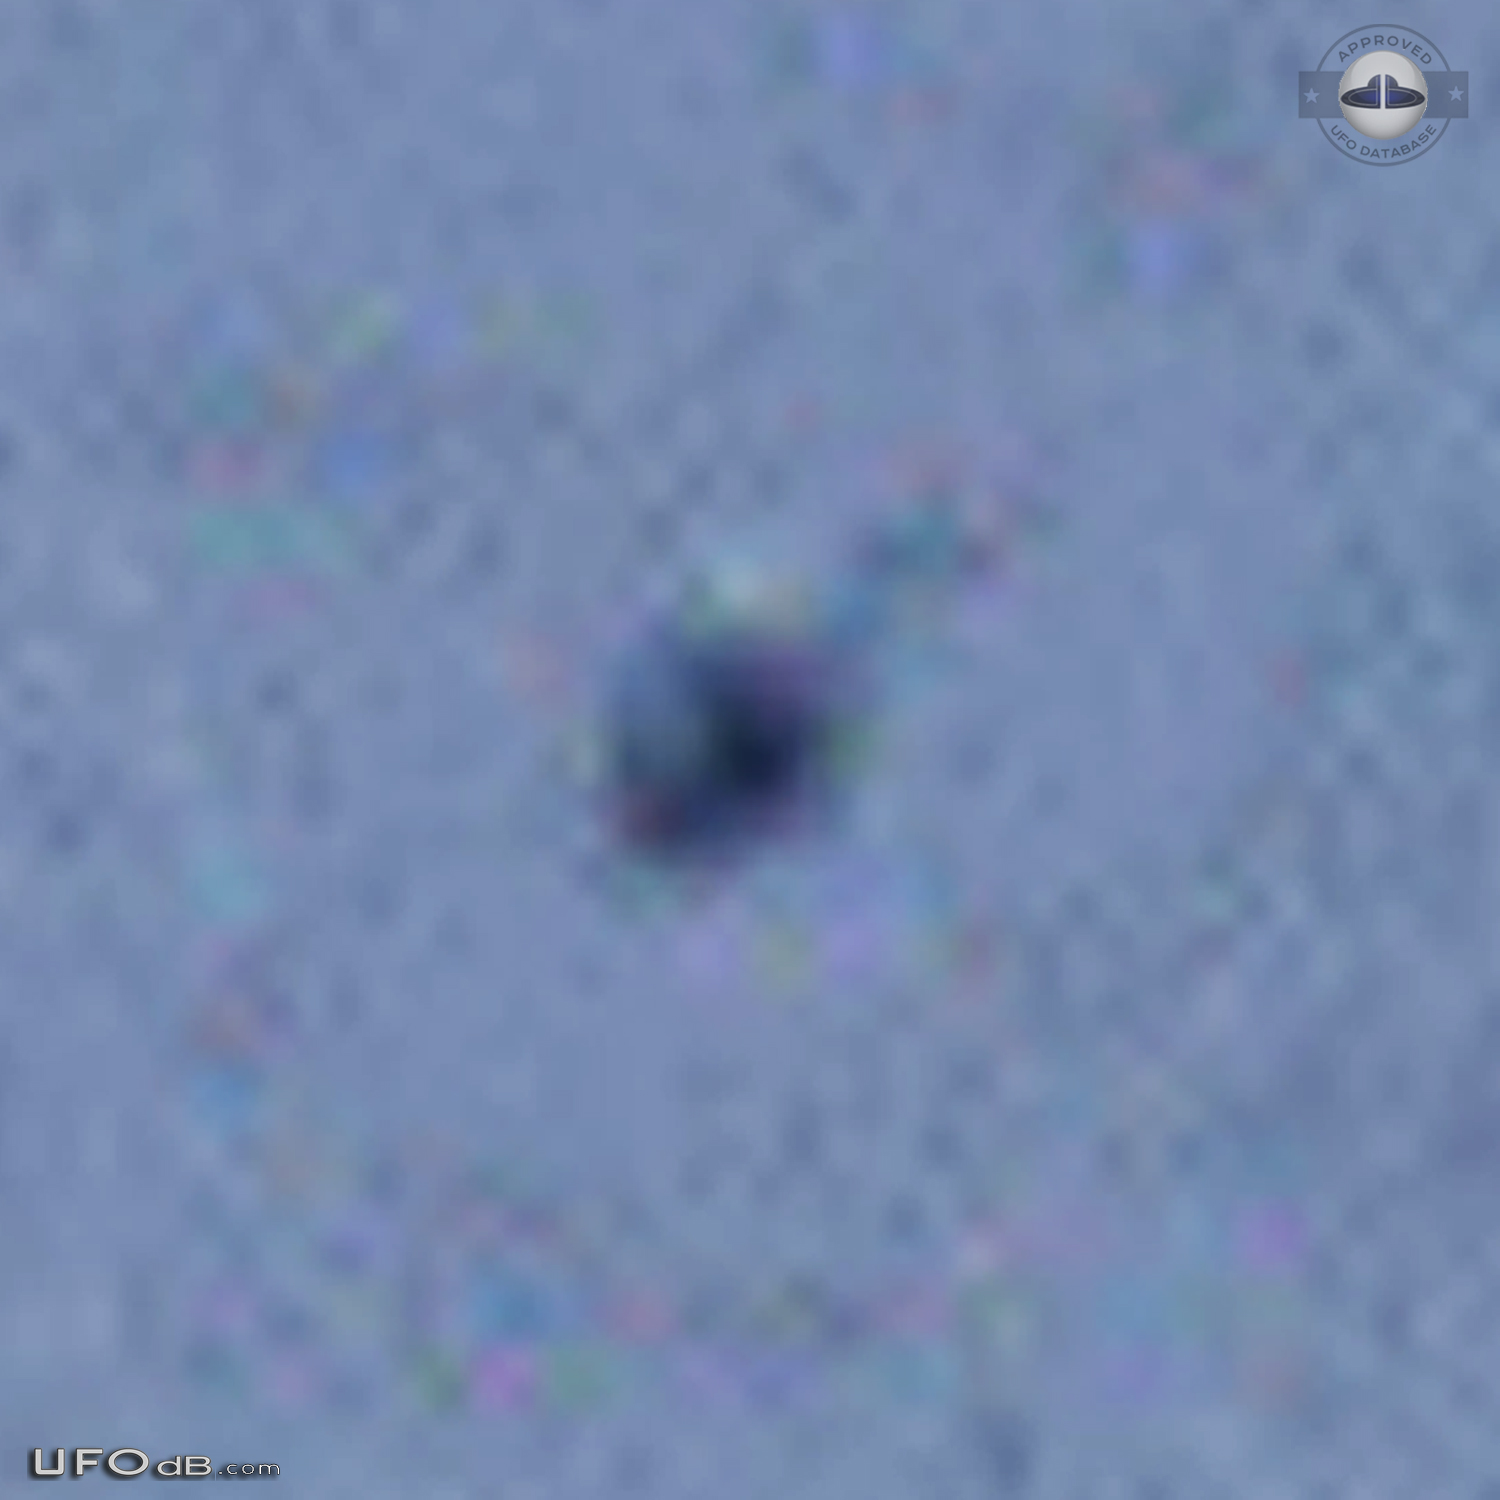 Out on a dog walk, ufo spotted for 15 minutes before it went upward UFO Picture #696-3